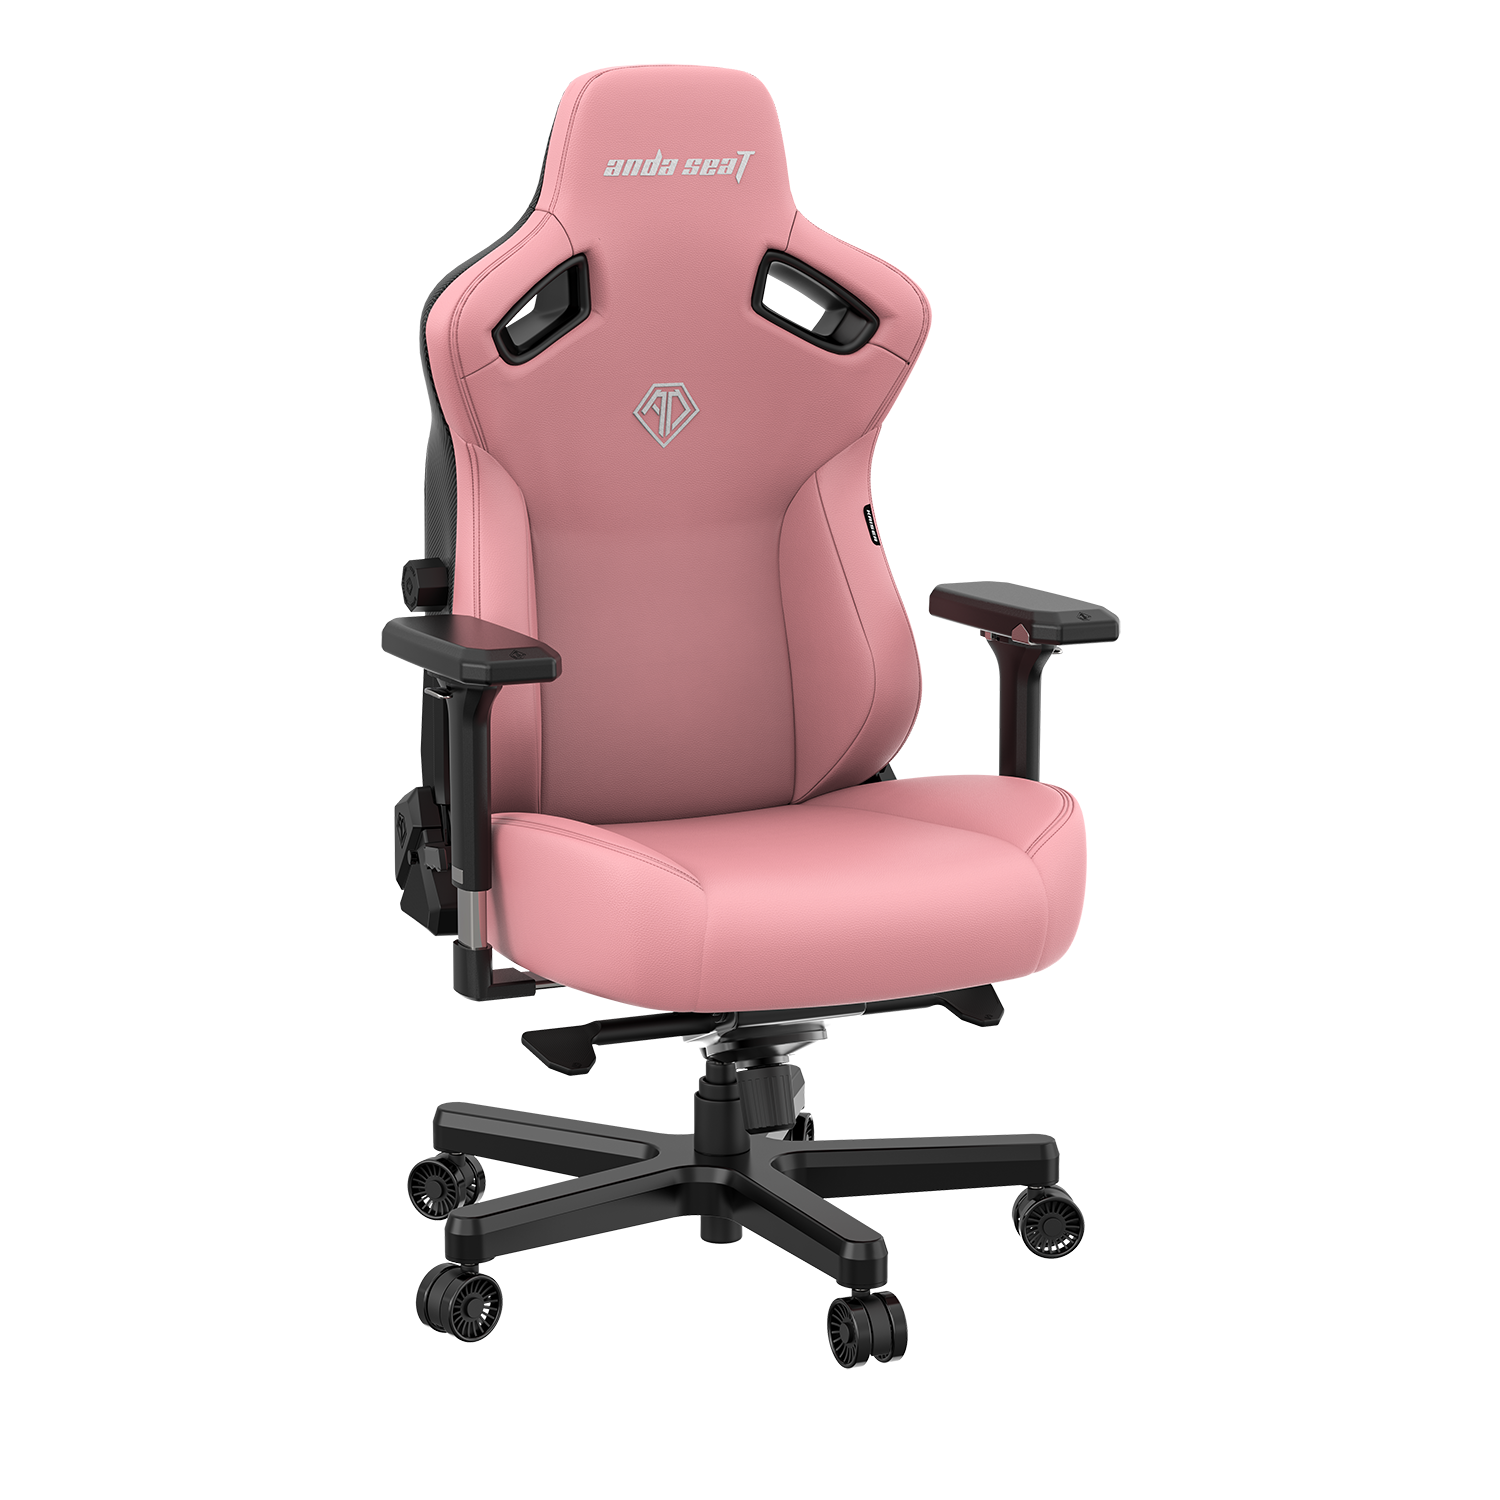 ANDA SEAT KAISER 3 L SIZE DURAXTRA LEATHERETTE - CREAMY PINK